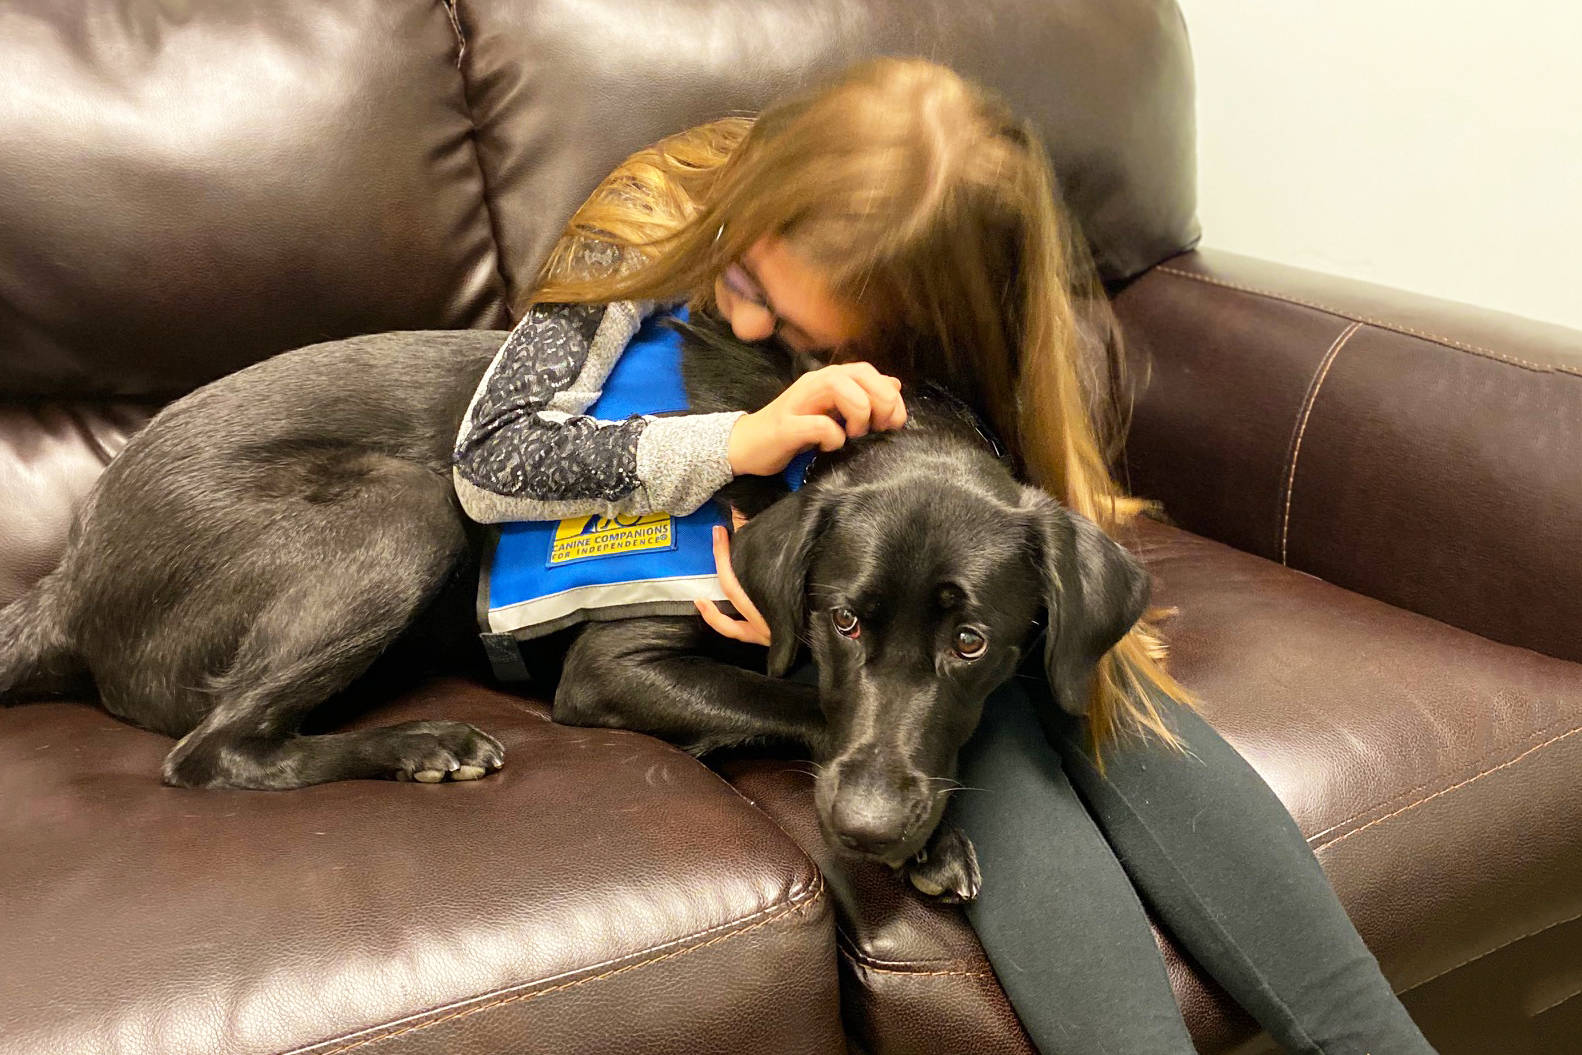 Sibella the Facility Comfort Dog is the newest member of the Dawson Place team. If you suspect a child in your life is experiencing abuse, Dawson Place can help.